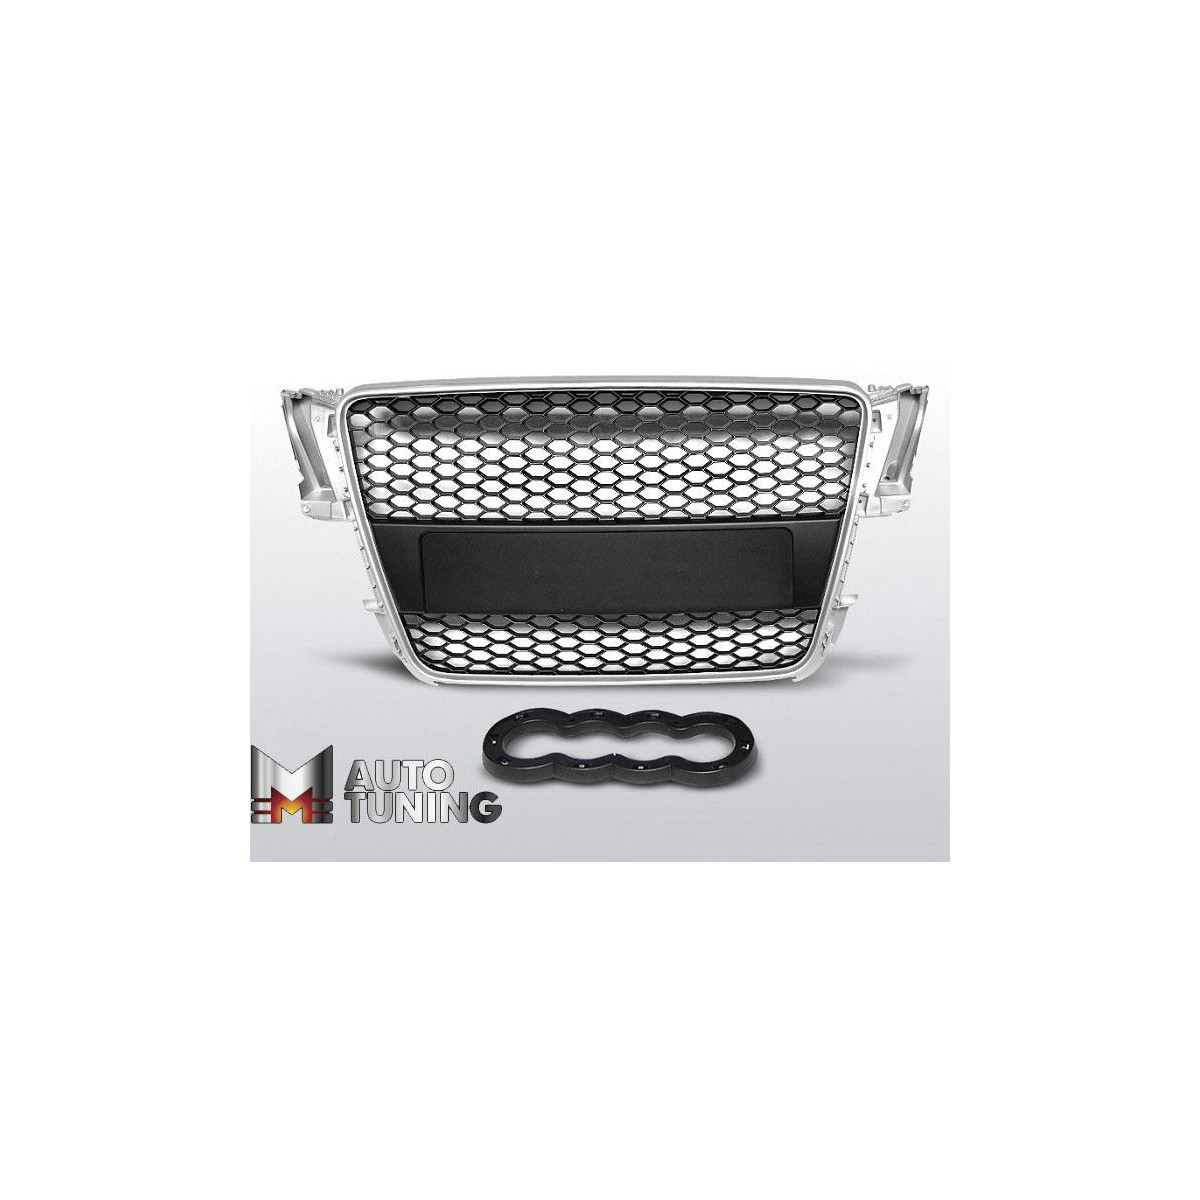 GRILL AUDI A5 07-06.11 SILVER RS-STYLE